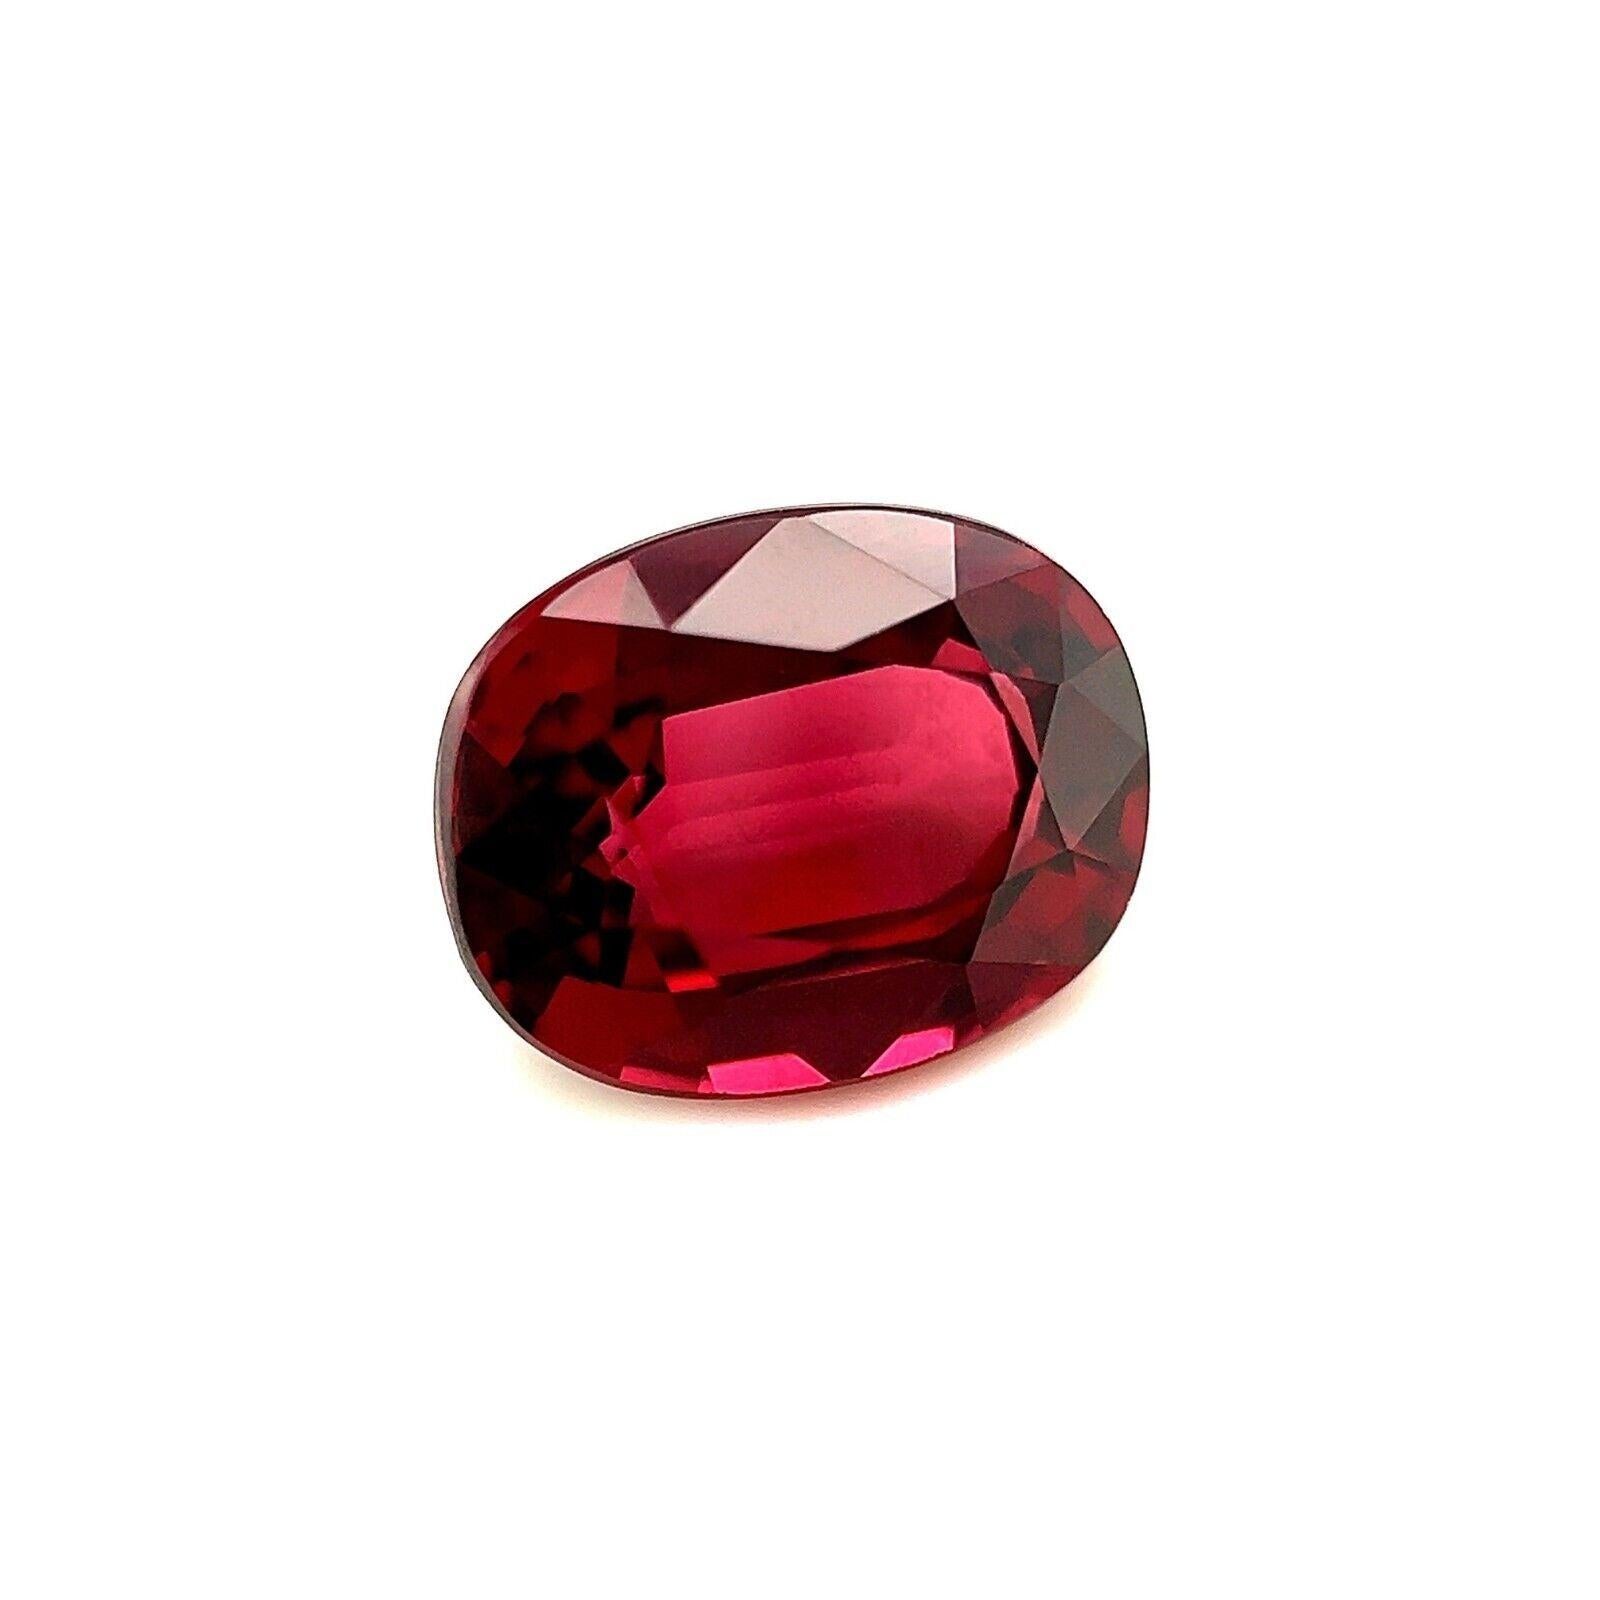 Natural 3.02ct Deep Purple Red Rhodolite Garnet Oval 9.2x7.4mm Loose Gemstone

Natural Loose Rhodolite Garnet Gem.
3.02 Carat with a beautiful deep purple red colour and good clarity, a clean stone with only some small natural inclusions visible